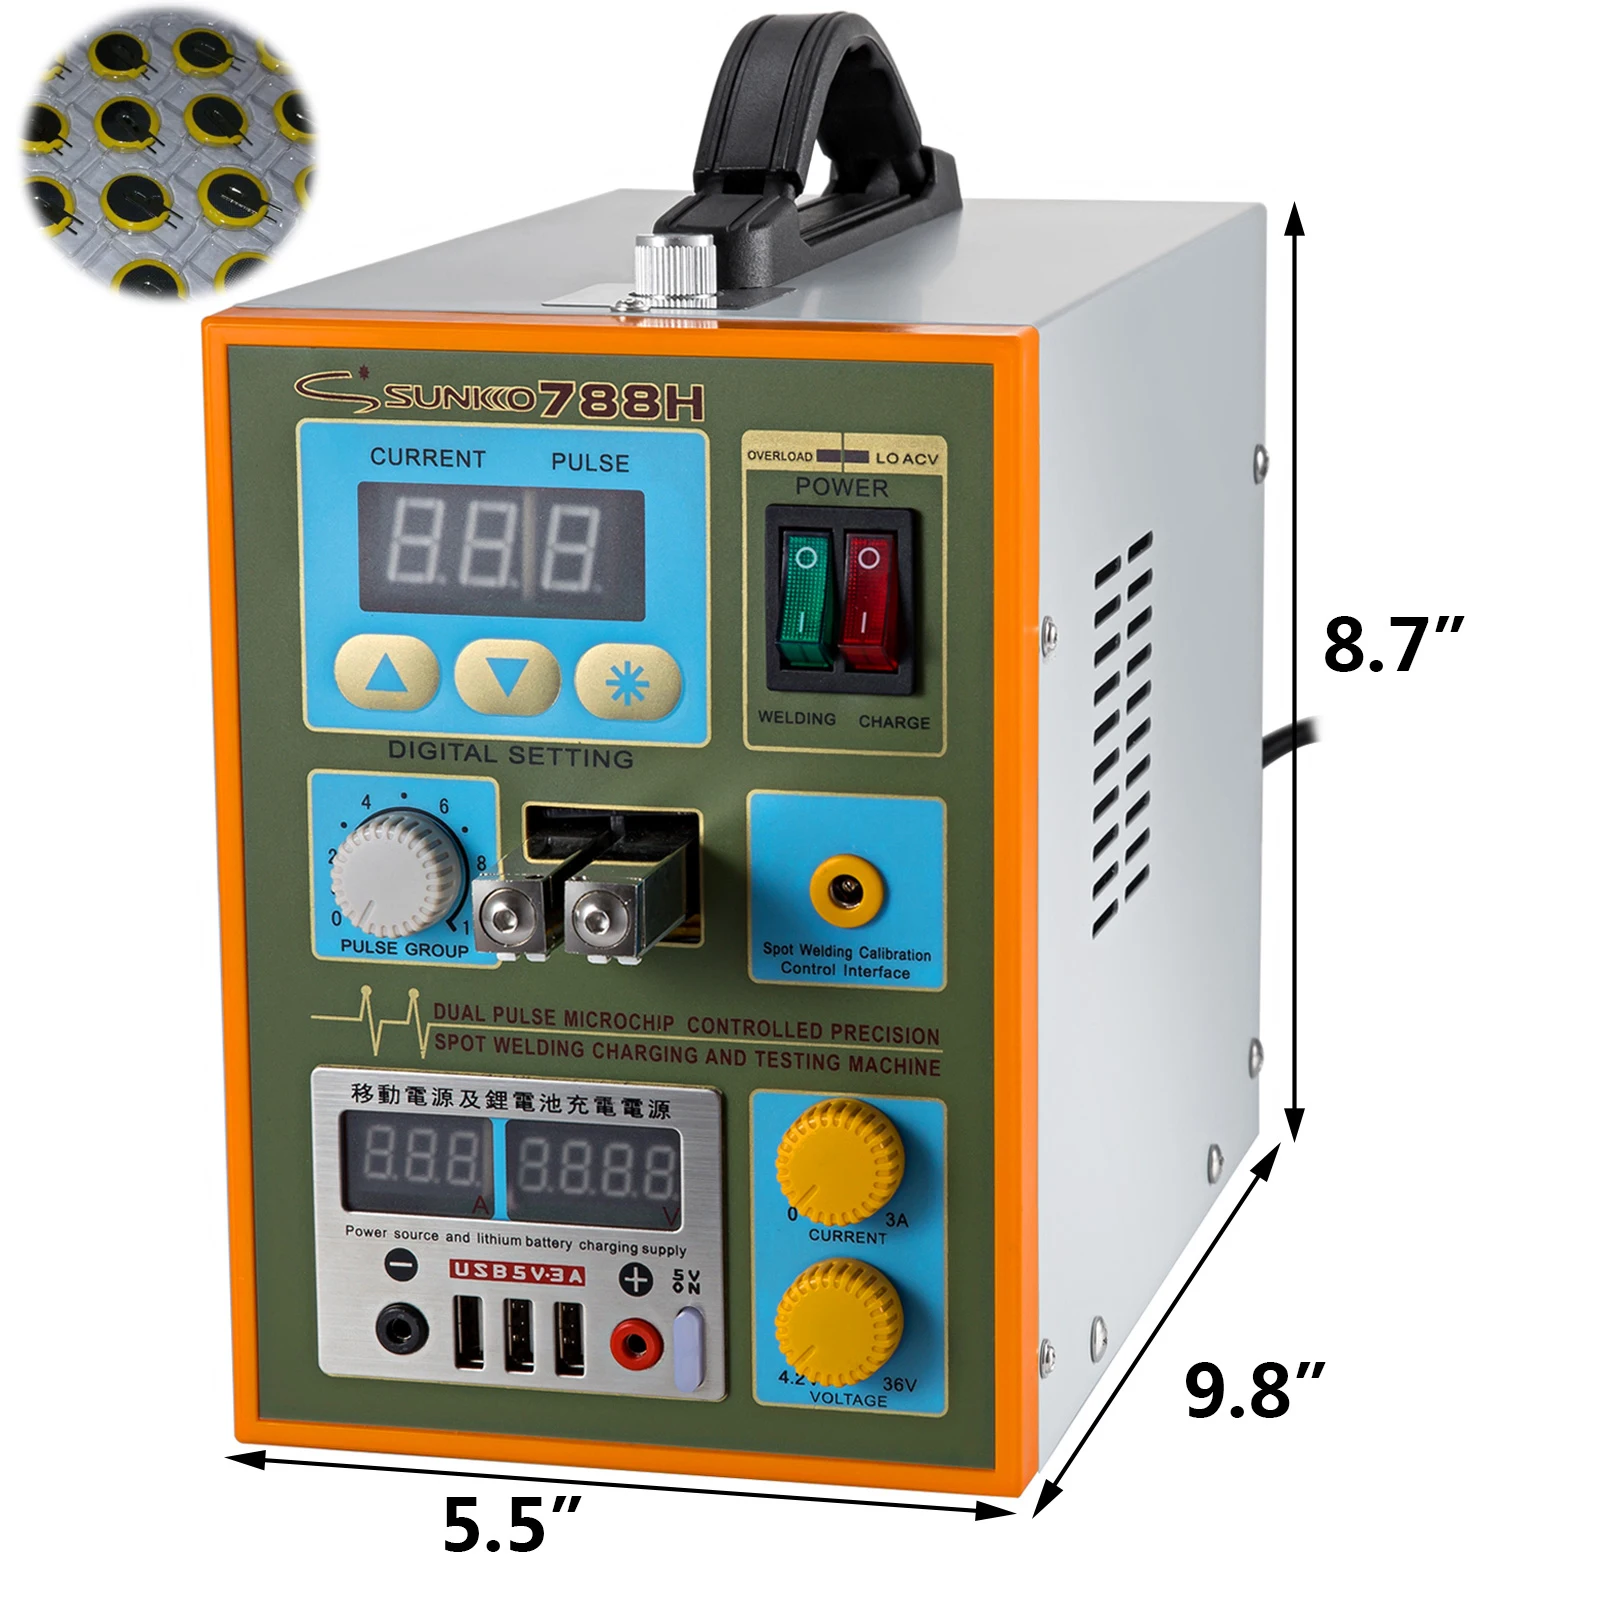 0.05-0.2mm 788H-USB Battery Pulse Spot Welder w/ 1Kg Nickel Plated Steel Strip for 18650 With LED Lighting Function